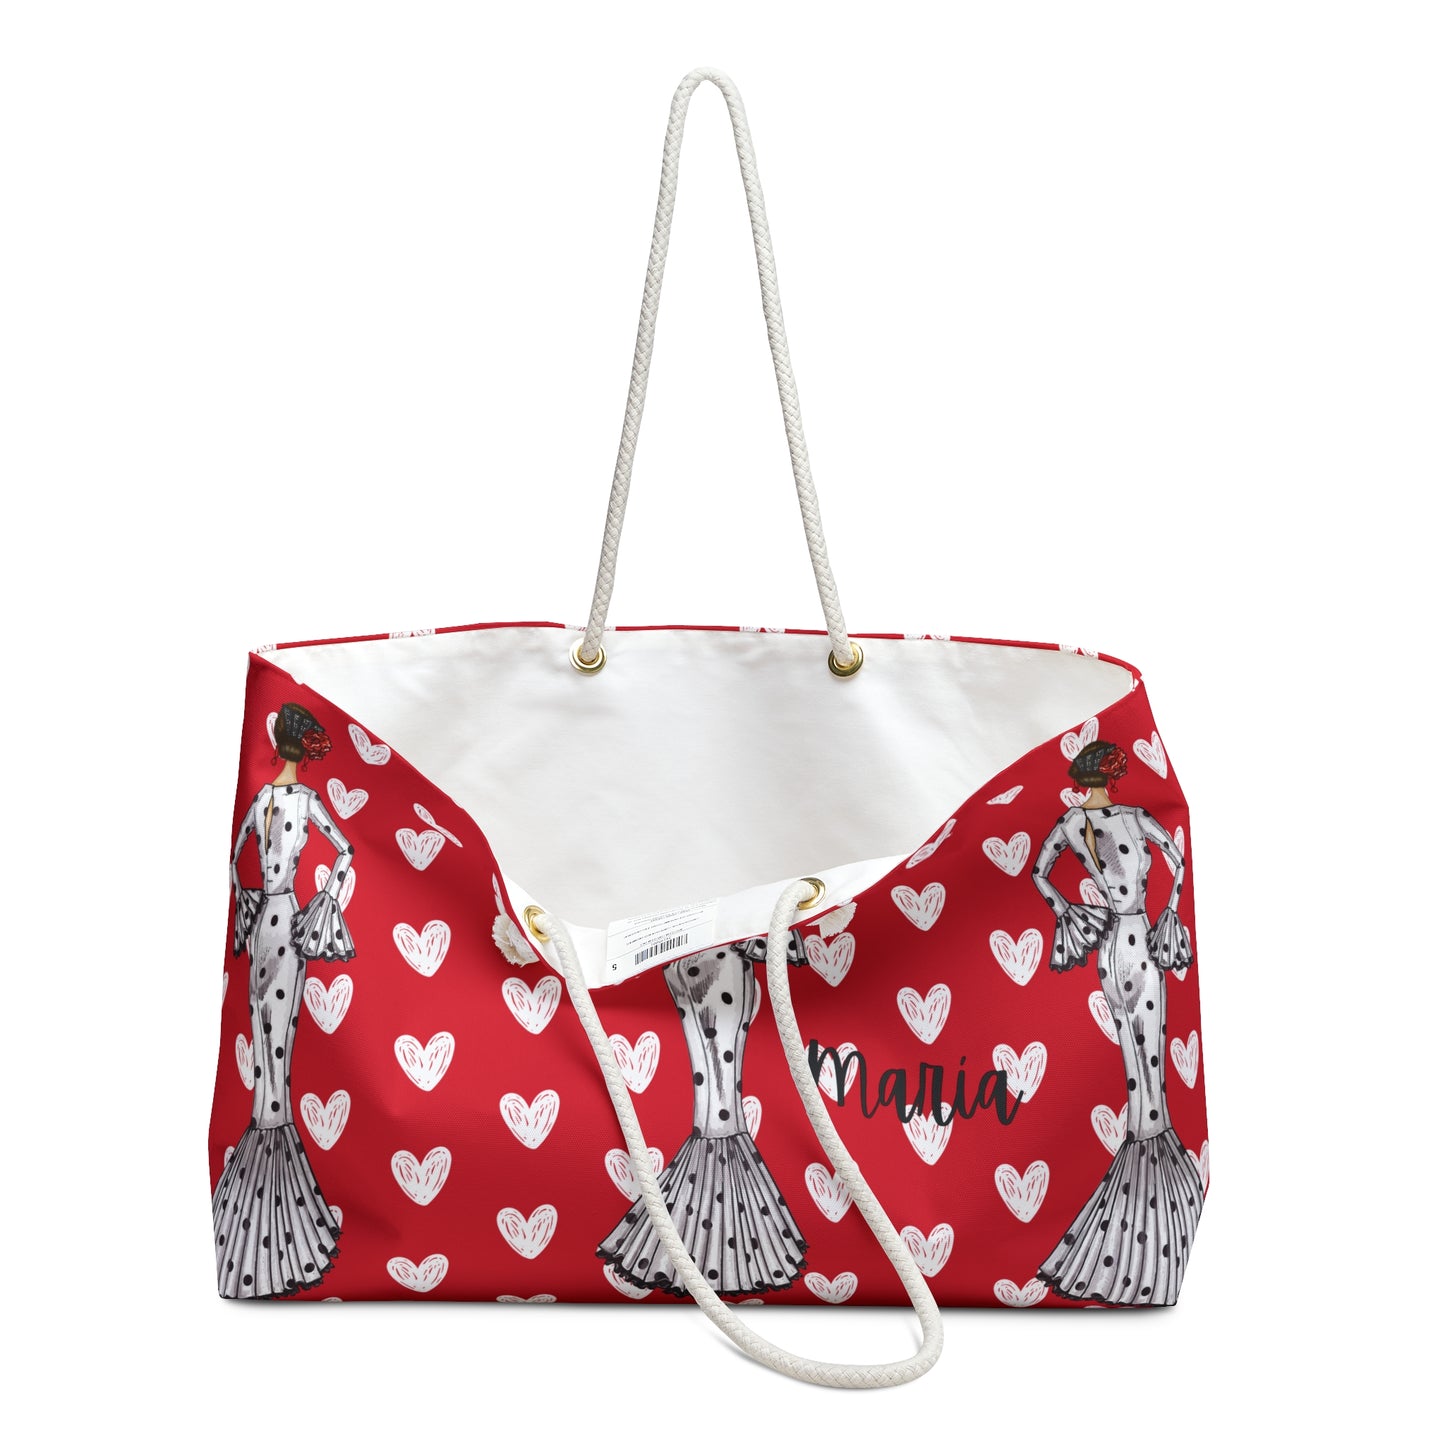 a red and white bag with hearts on it